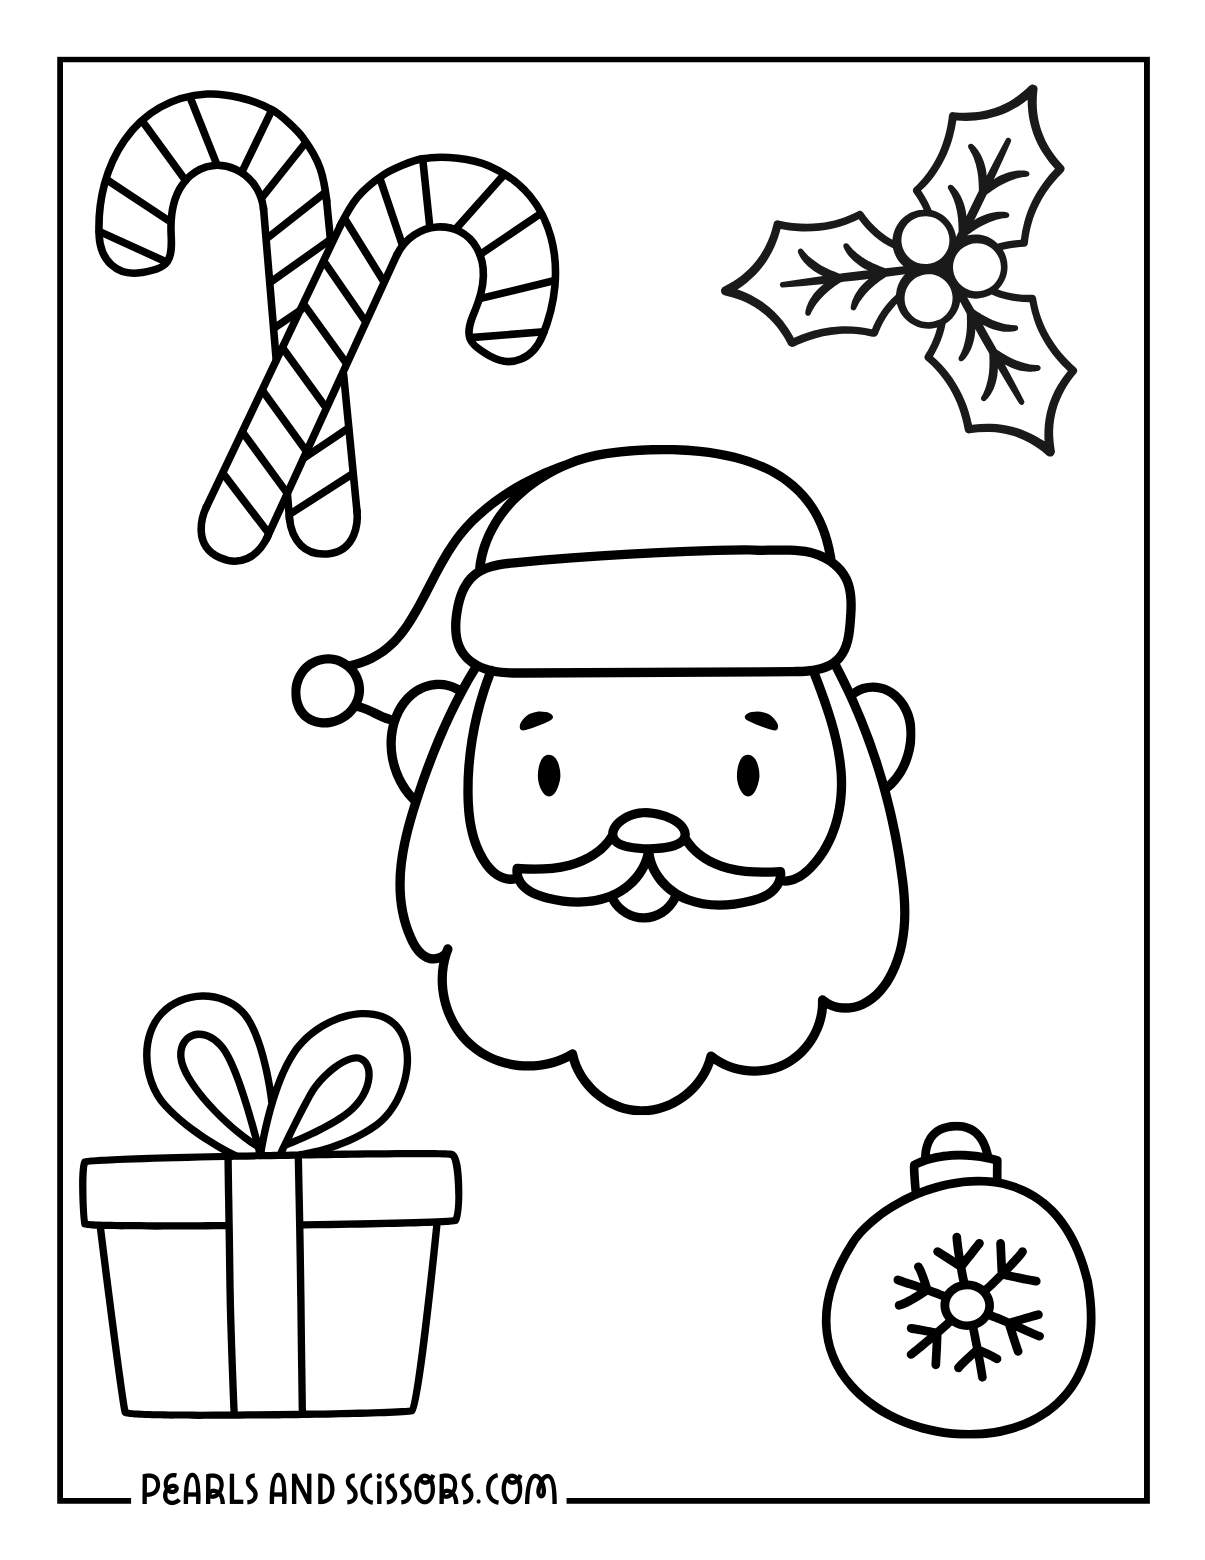 Christmas elements: candy canes, mistletoe, Santa Claus, christmas presents and ornaments to color for kids.